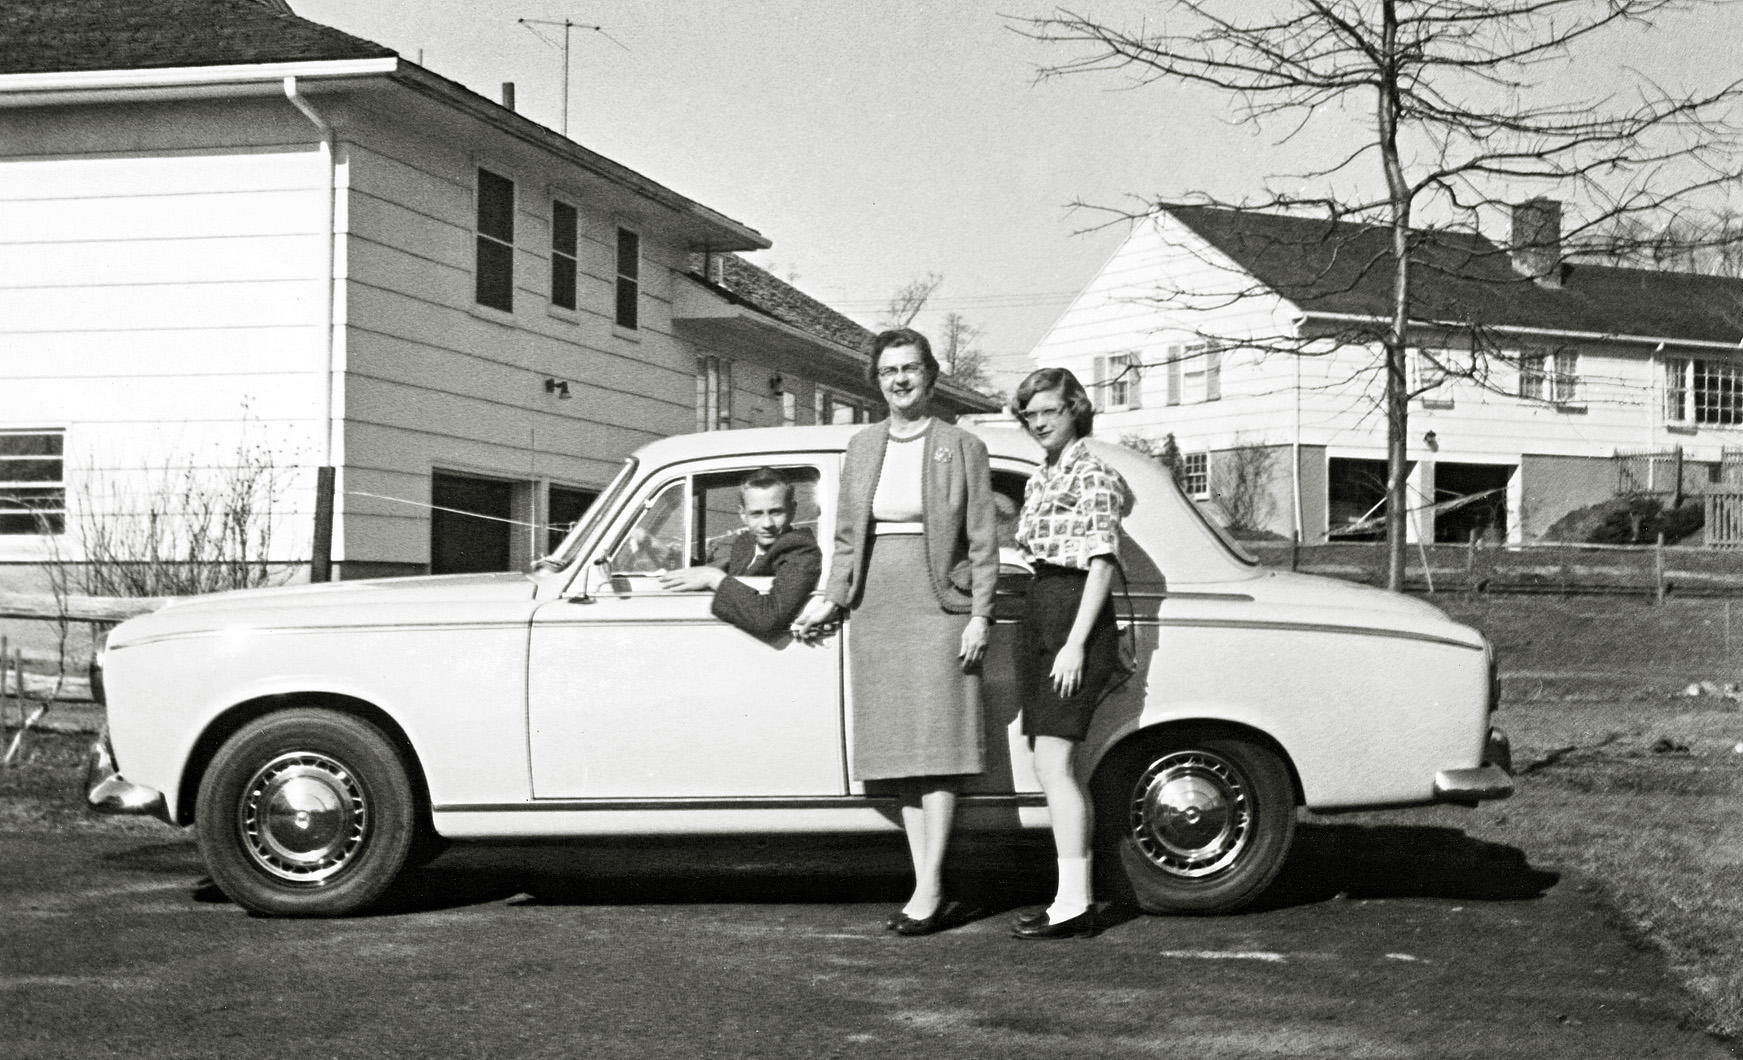 Dad got this Peugeot as a commuter car to travel from our house in Chatham to Union, New Jersey each day. It had radial tires and a sun roof. With me at the wheel and Mom and sister. View full size.